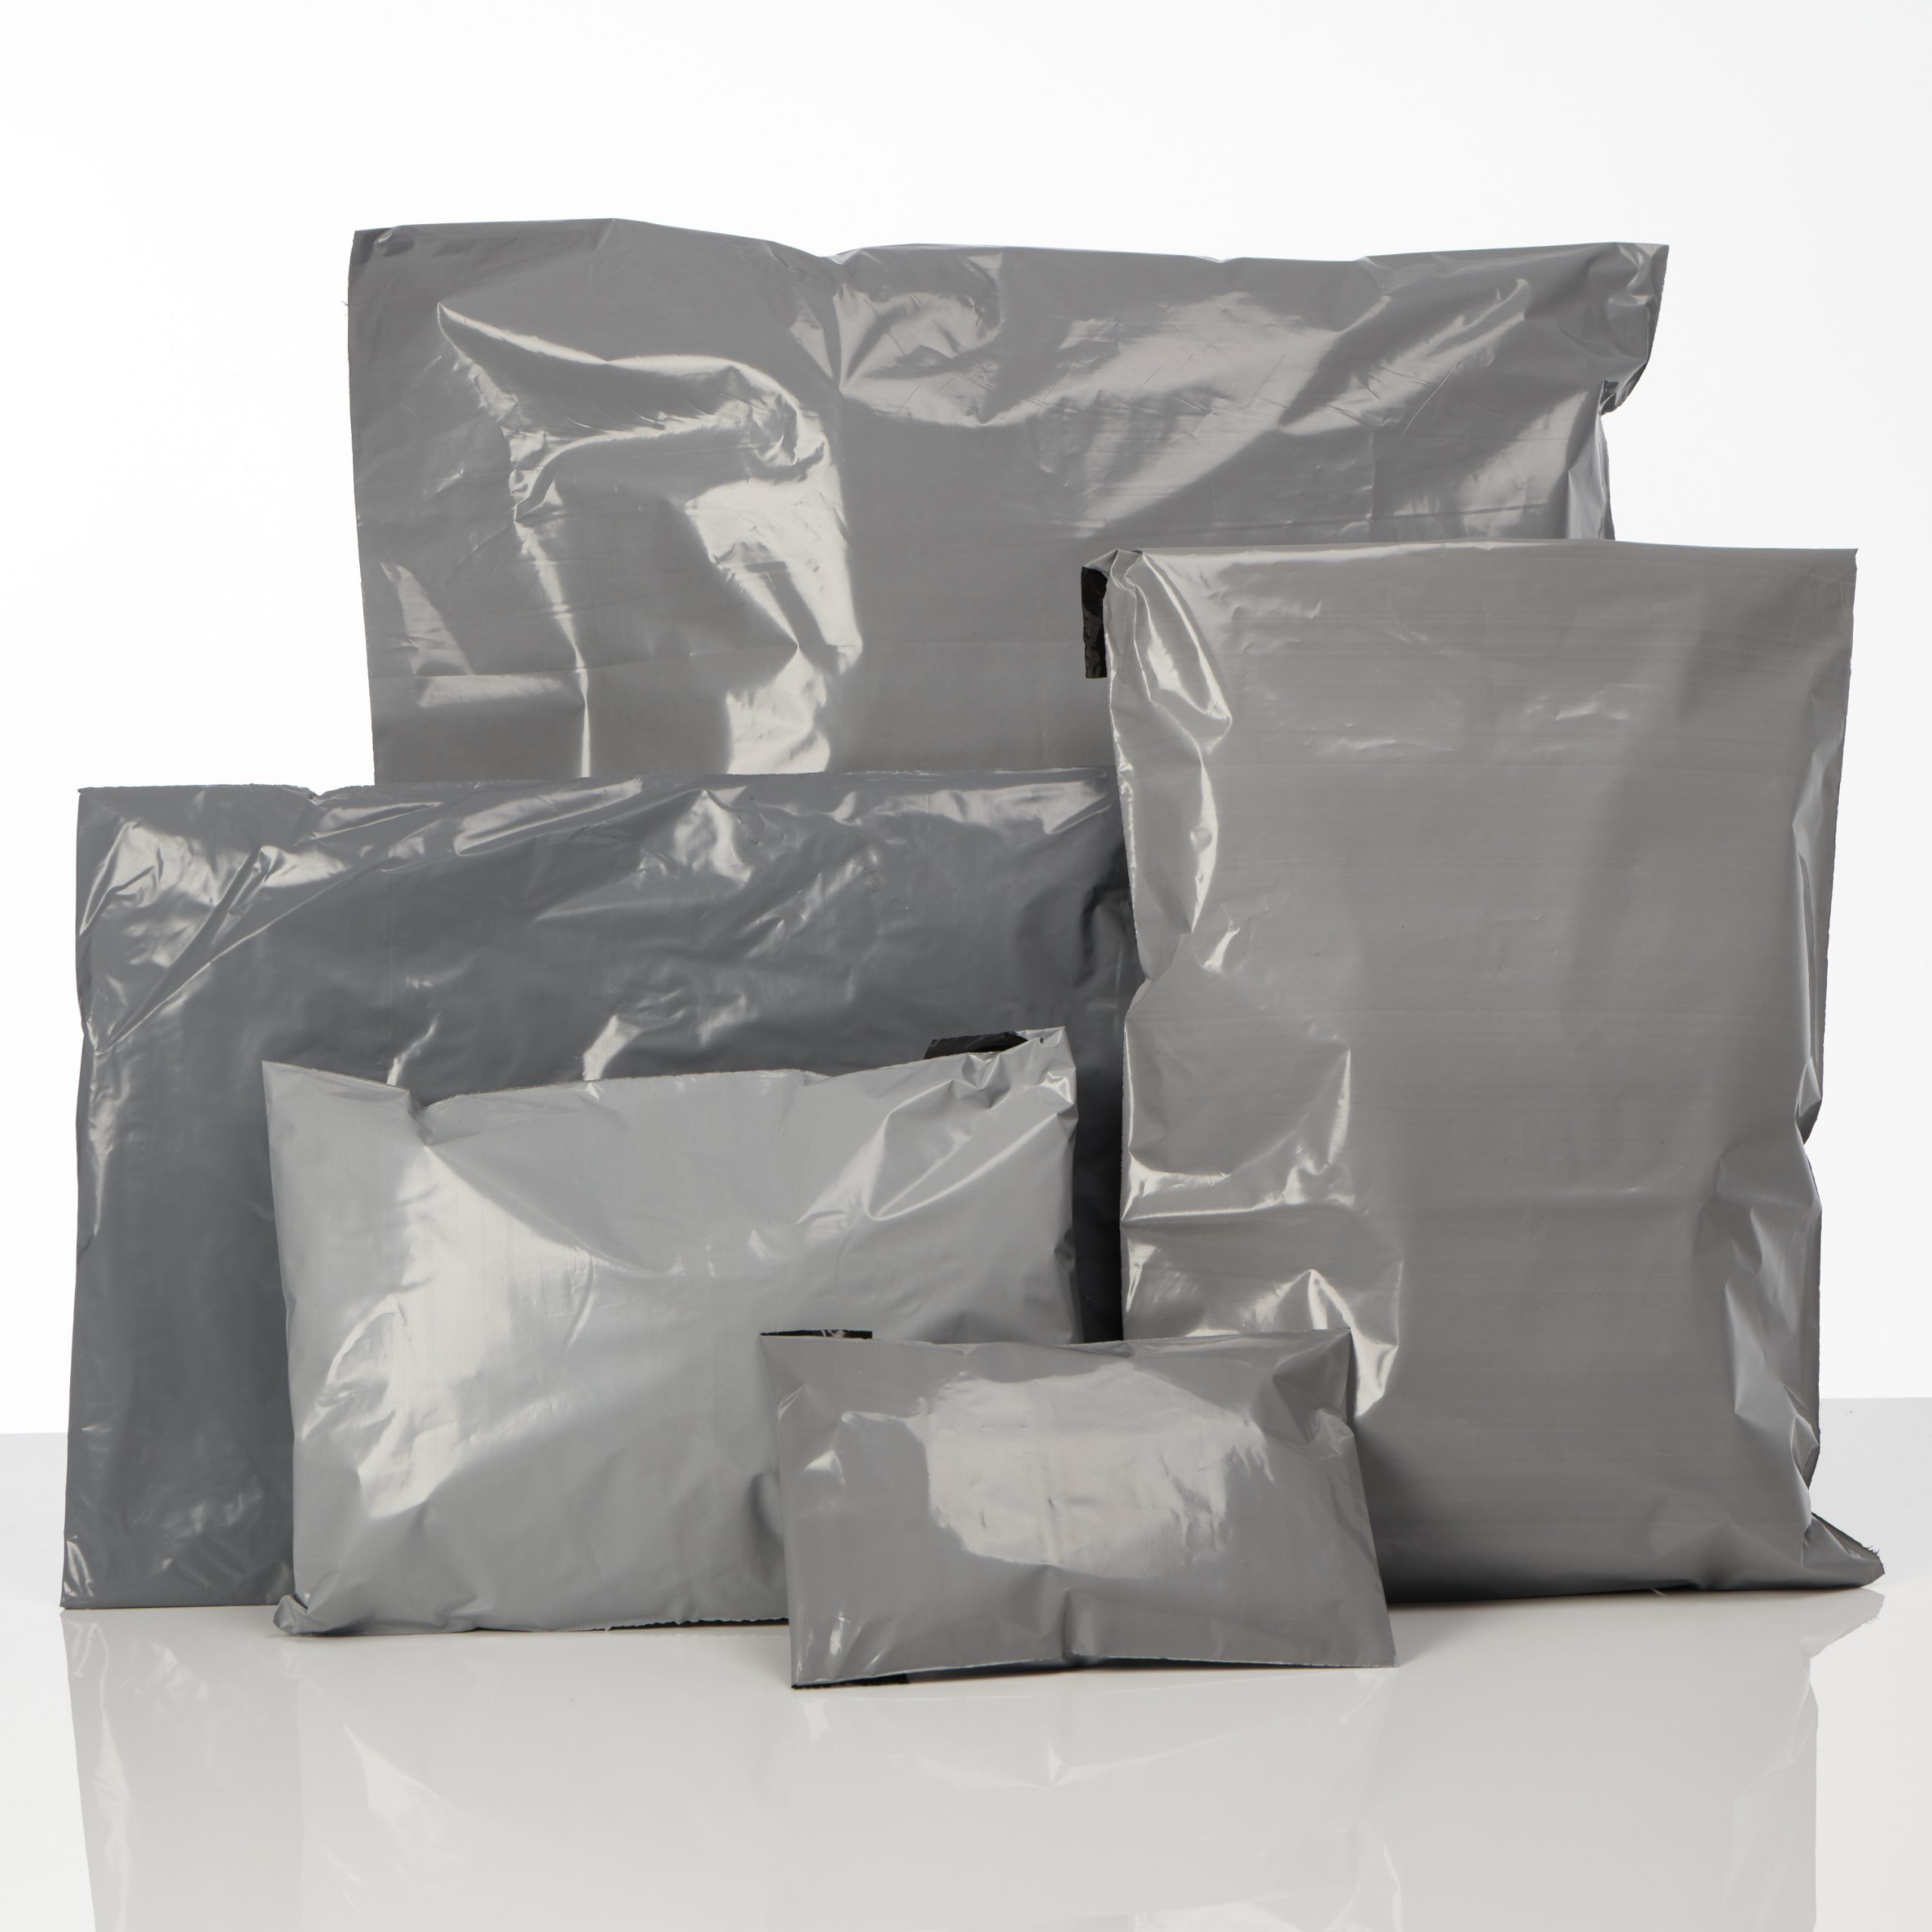 Strong Big Size Poly Mailing Postage Postal Bags Self Seal Quality Grey Plastic 